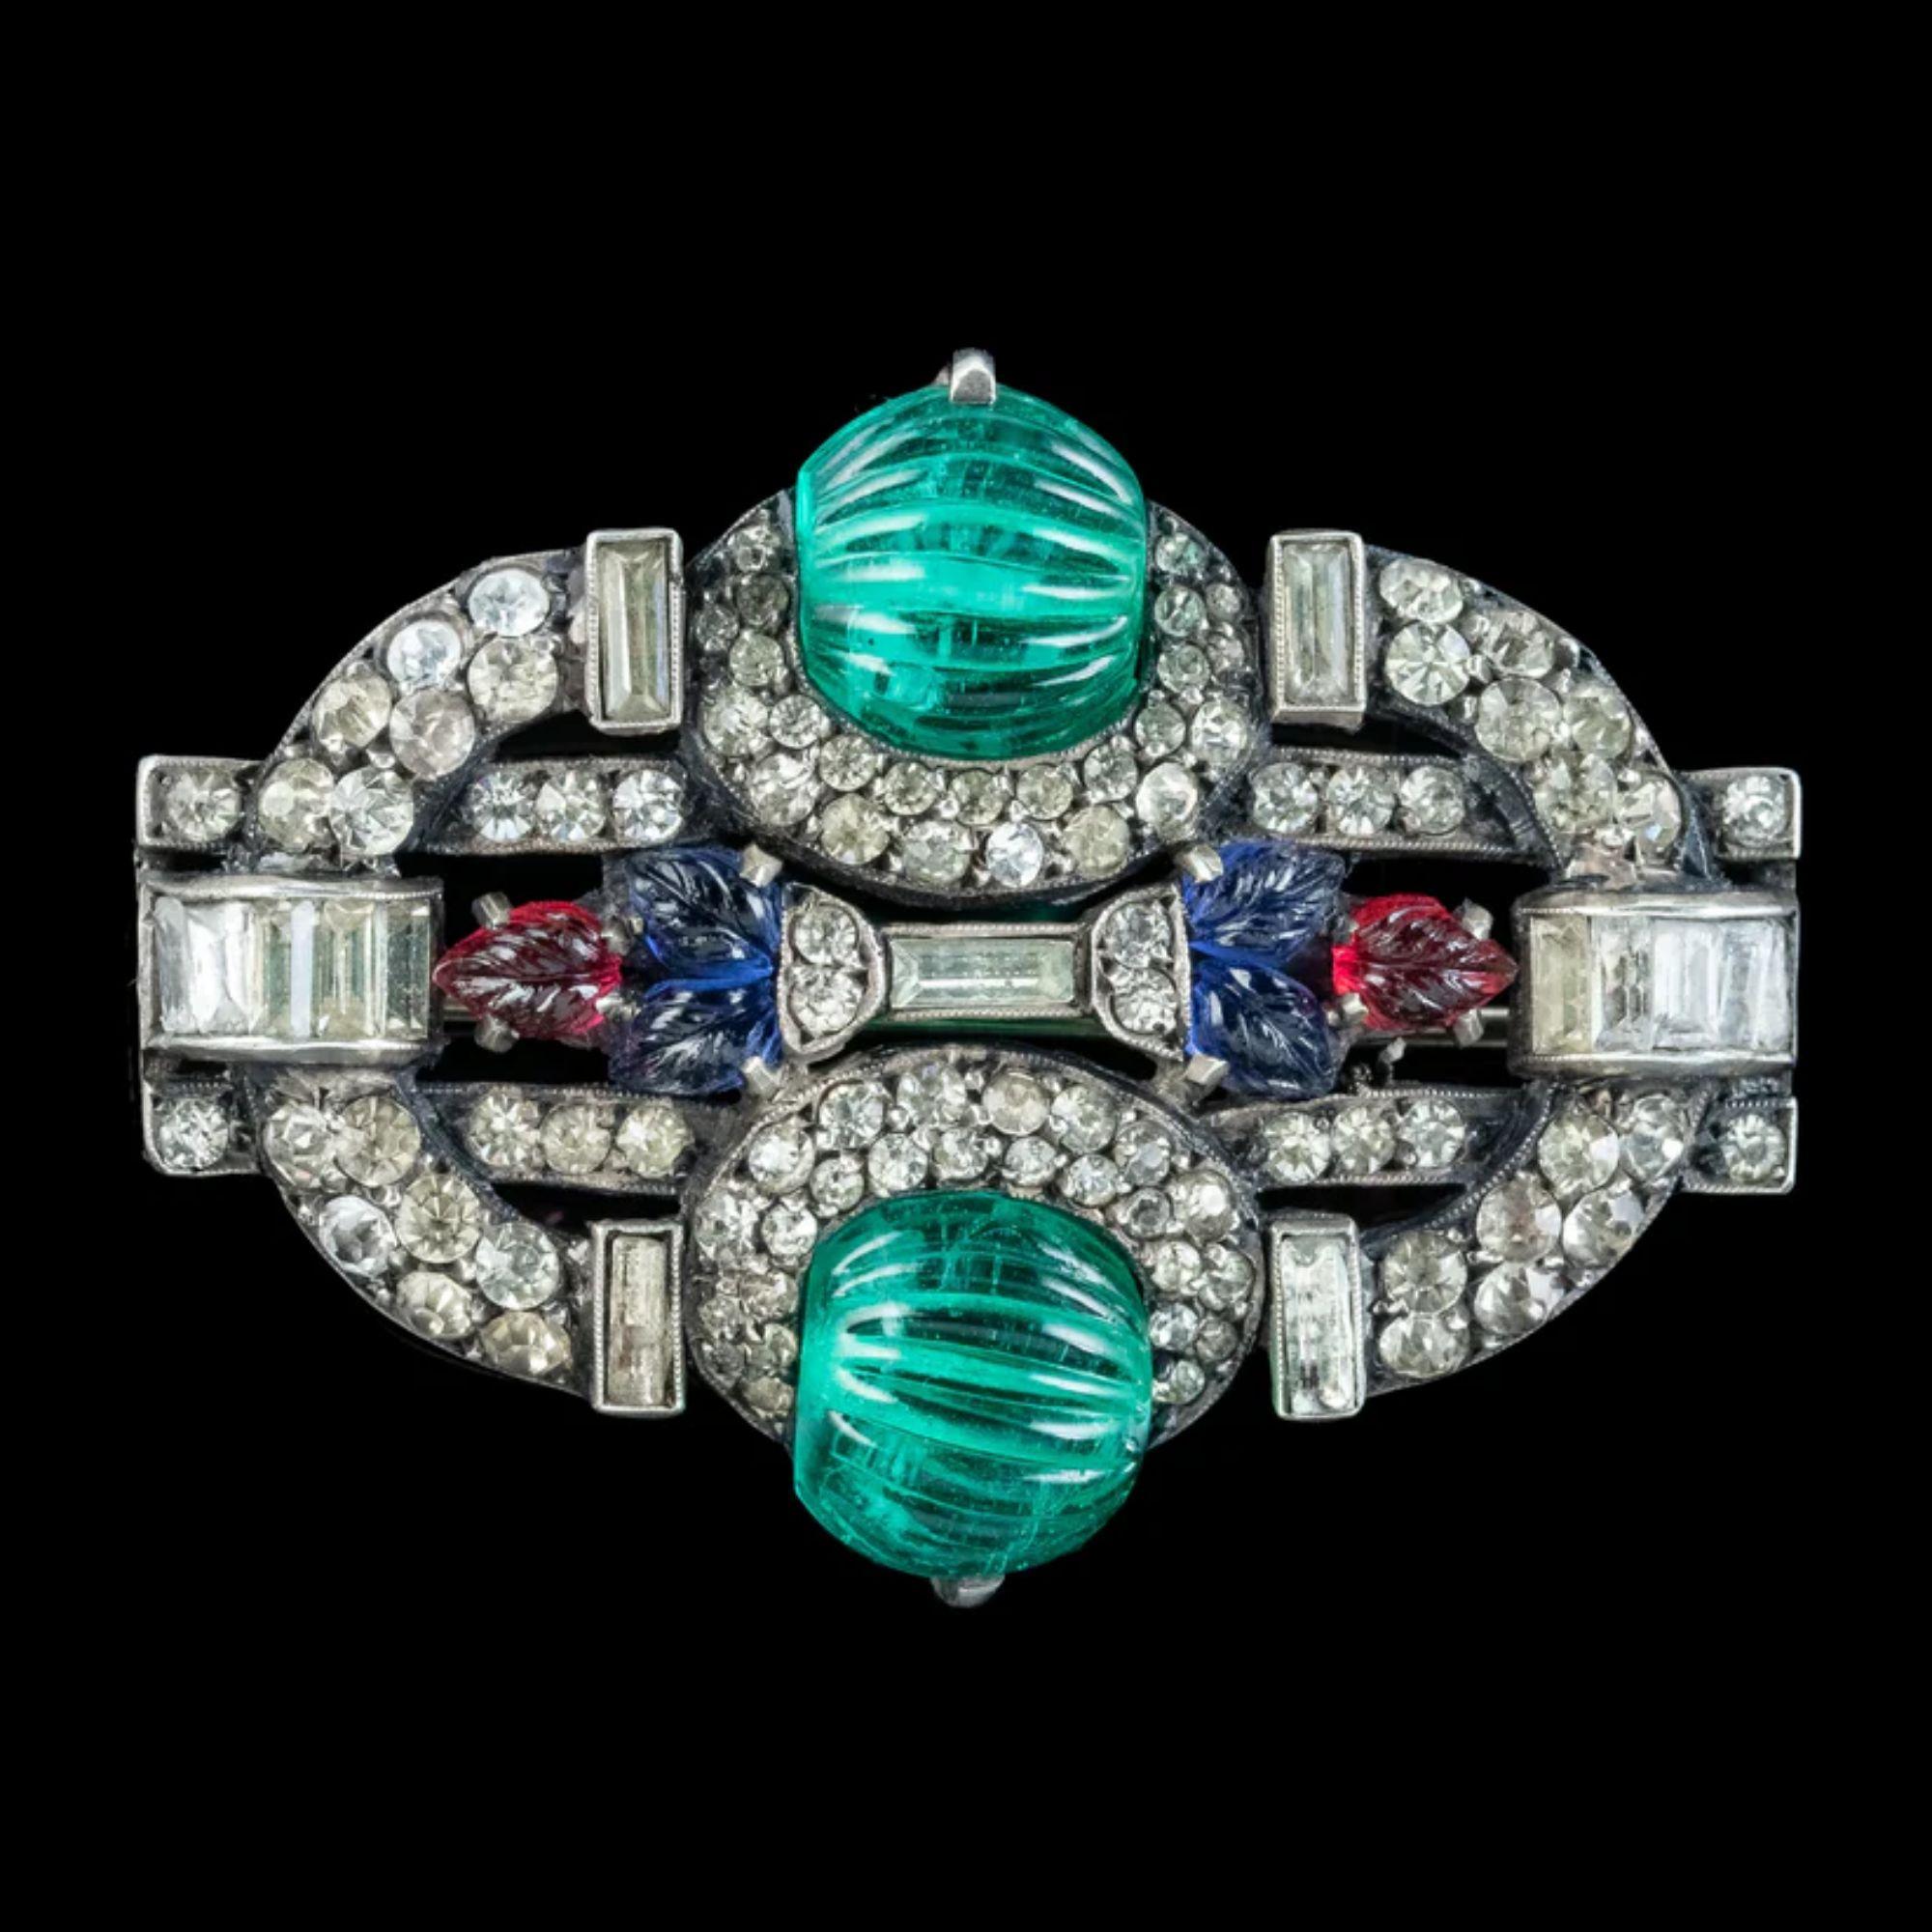 A glitzy antique Art Deco brooch from the 1920s decorated with glistening, clear pastes, a contrasting combination of round and baguette cut. Two ribbed green tourmaline spheres top and tail the gallery with blue and red paste leaves along the